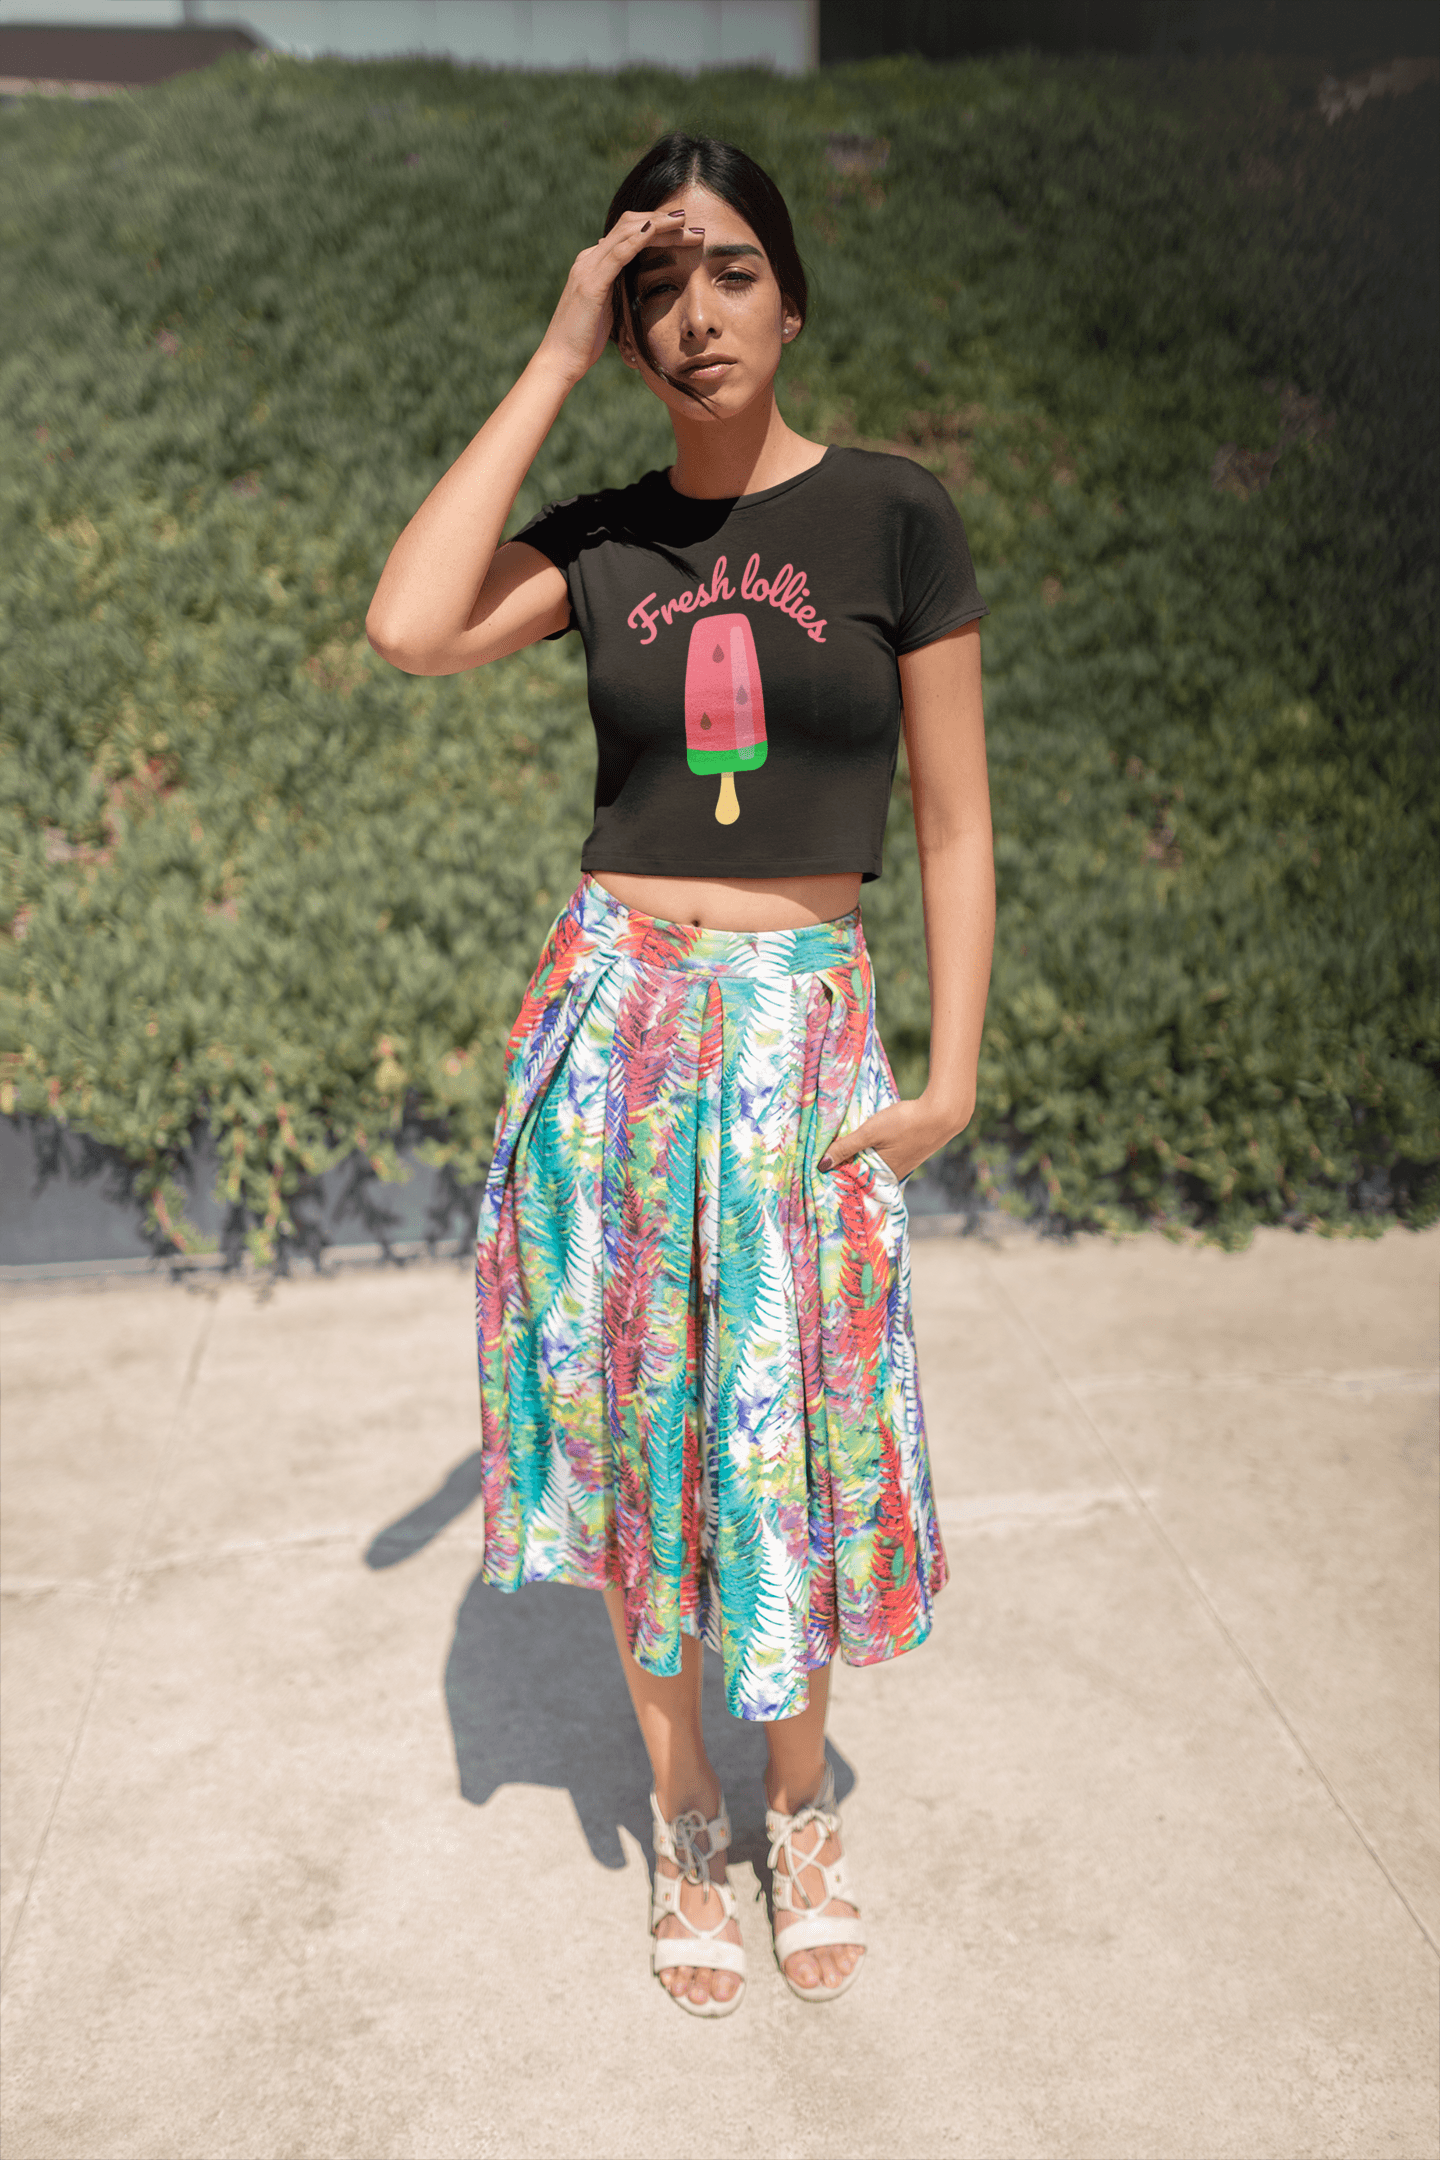 Fresh Lollies Crop Top - The Accessorys Official